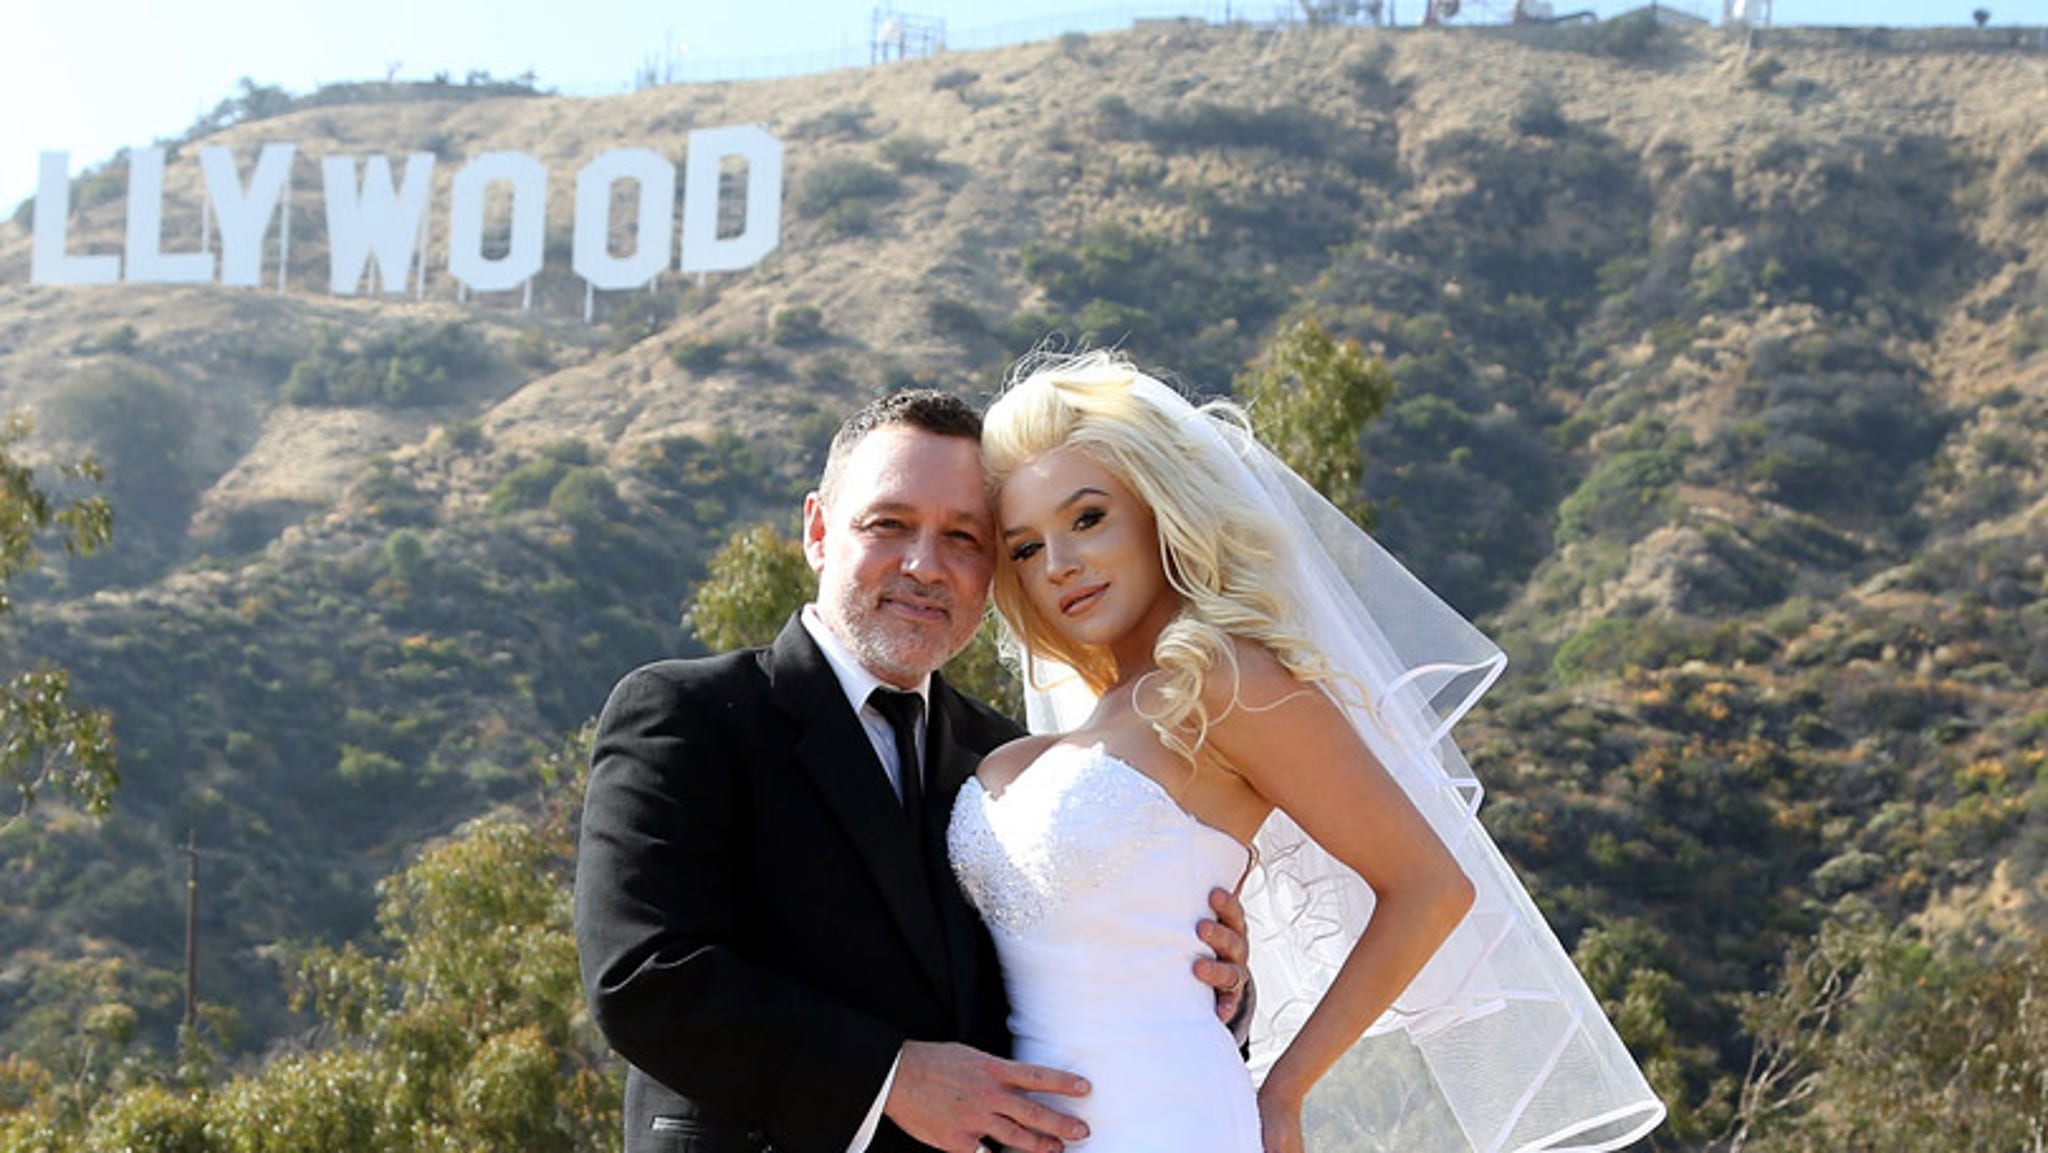 Pregnant Courtney Stodden And Doug Hutchison Renew Vows For 5th